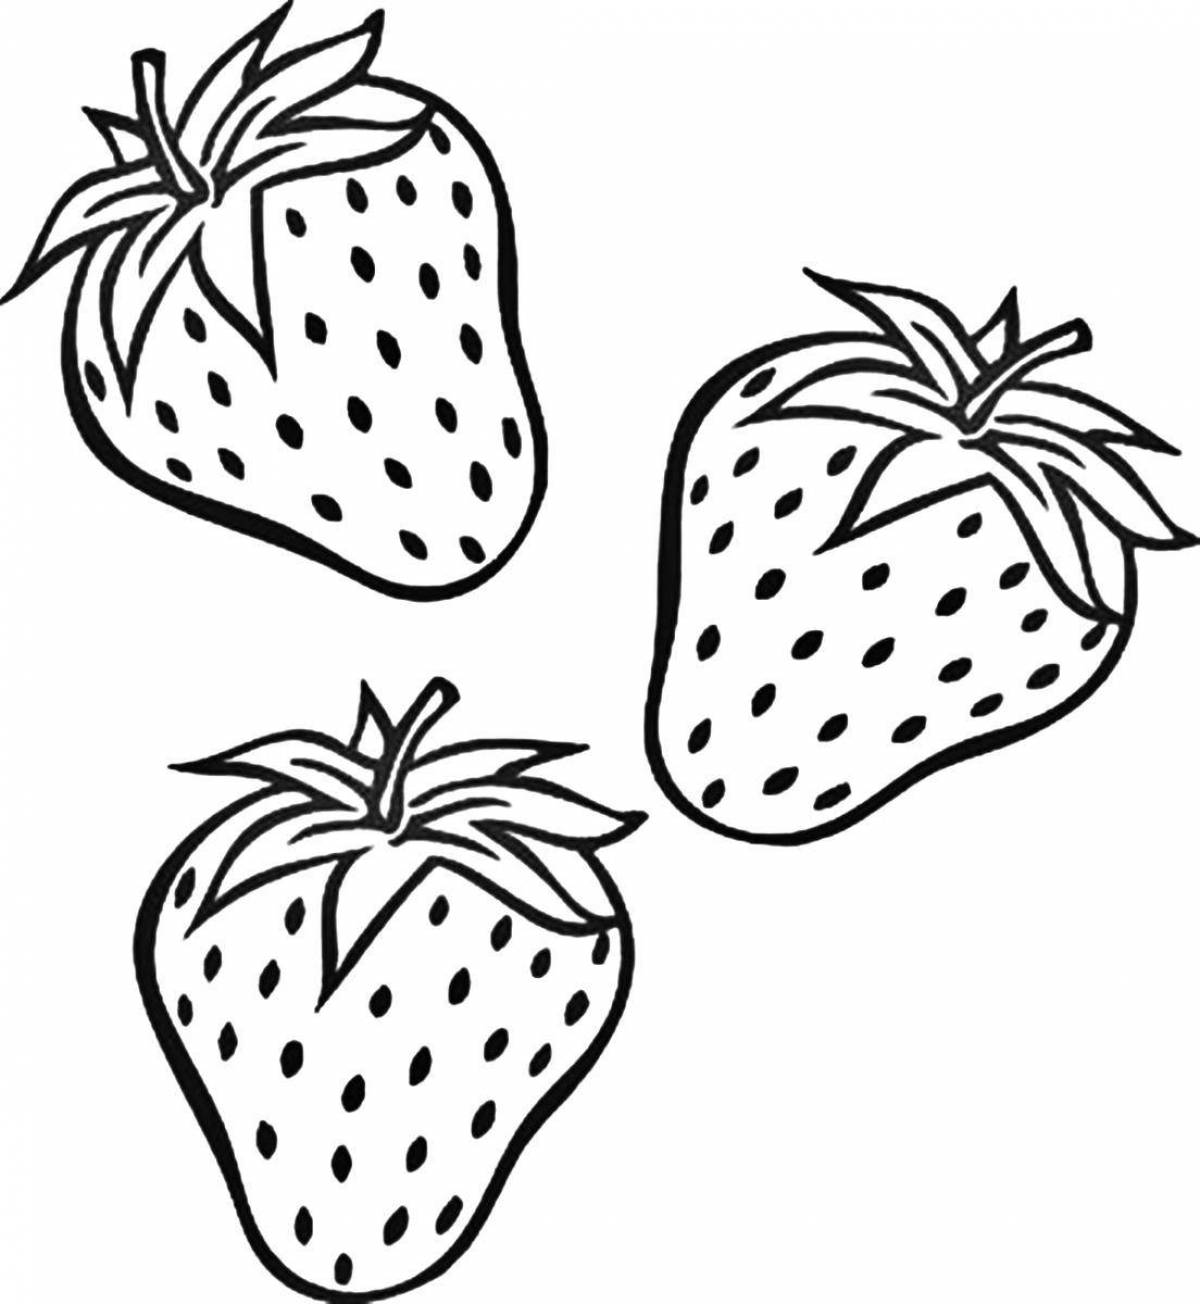 Fun coloring book strawberries for children 5-6 years old